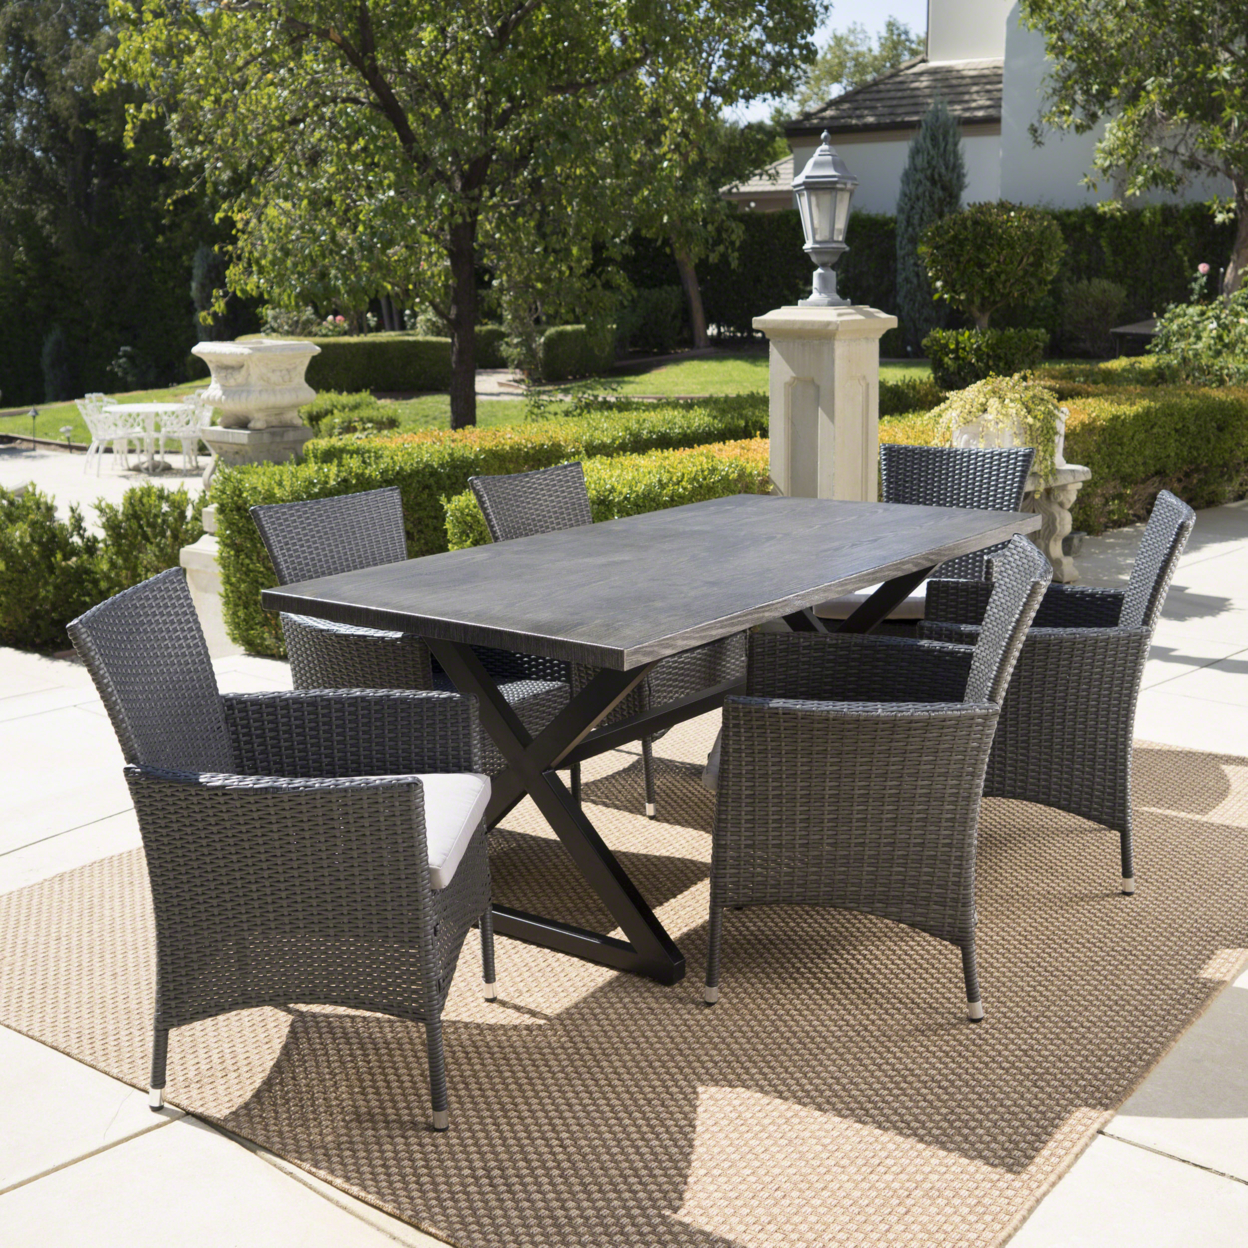 Dionlynn Outdoor 7 Piece Aluminum Dining Set With Wicker Dining Chairs - Brown/Multi-brown